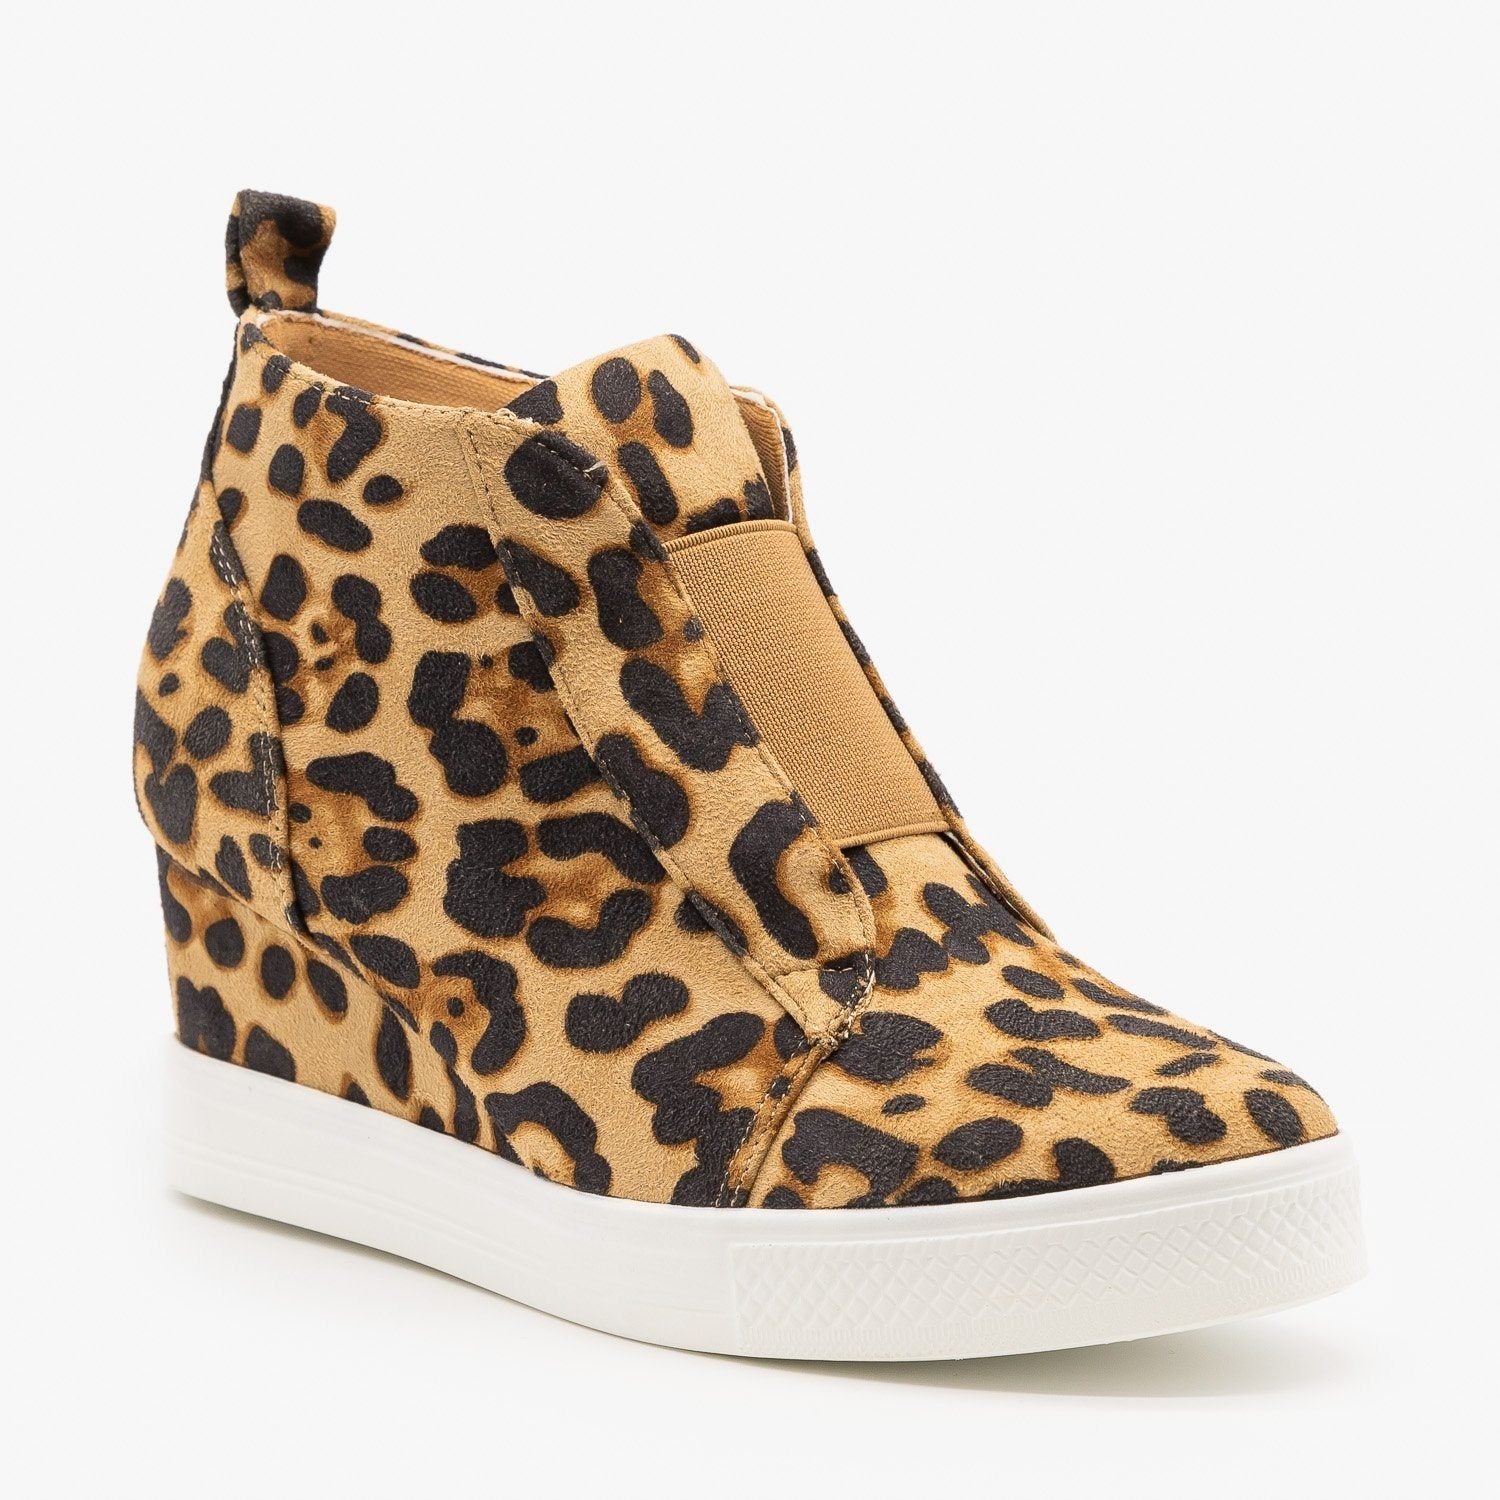 ccocci zoey wedge sneakers